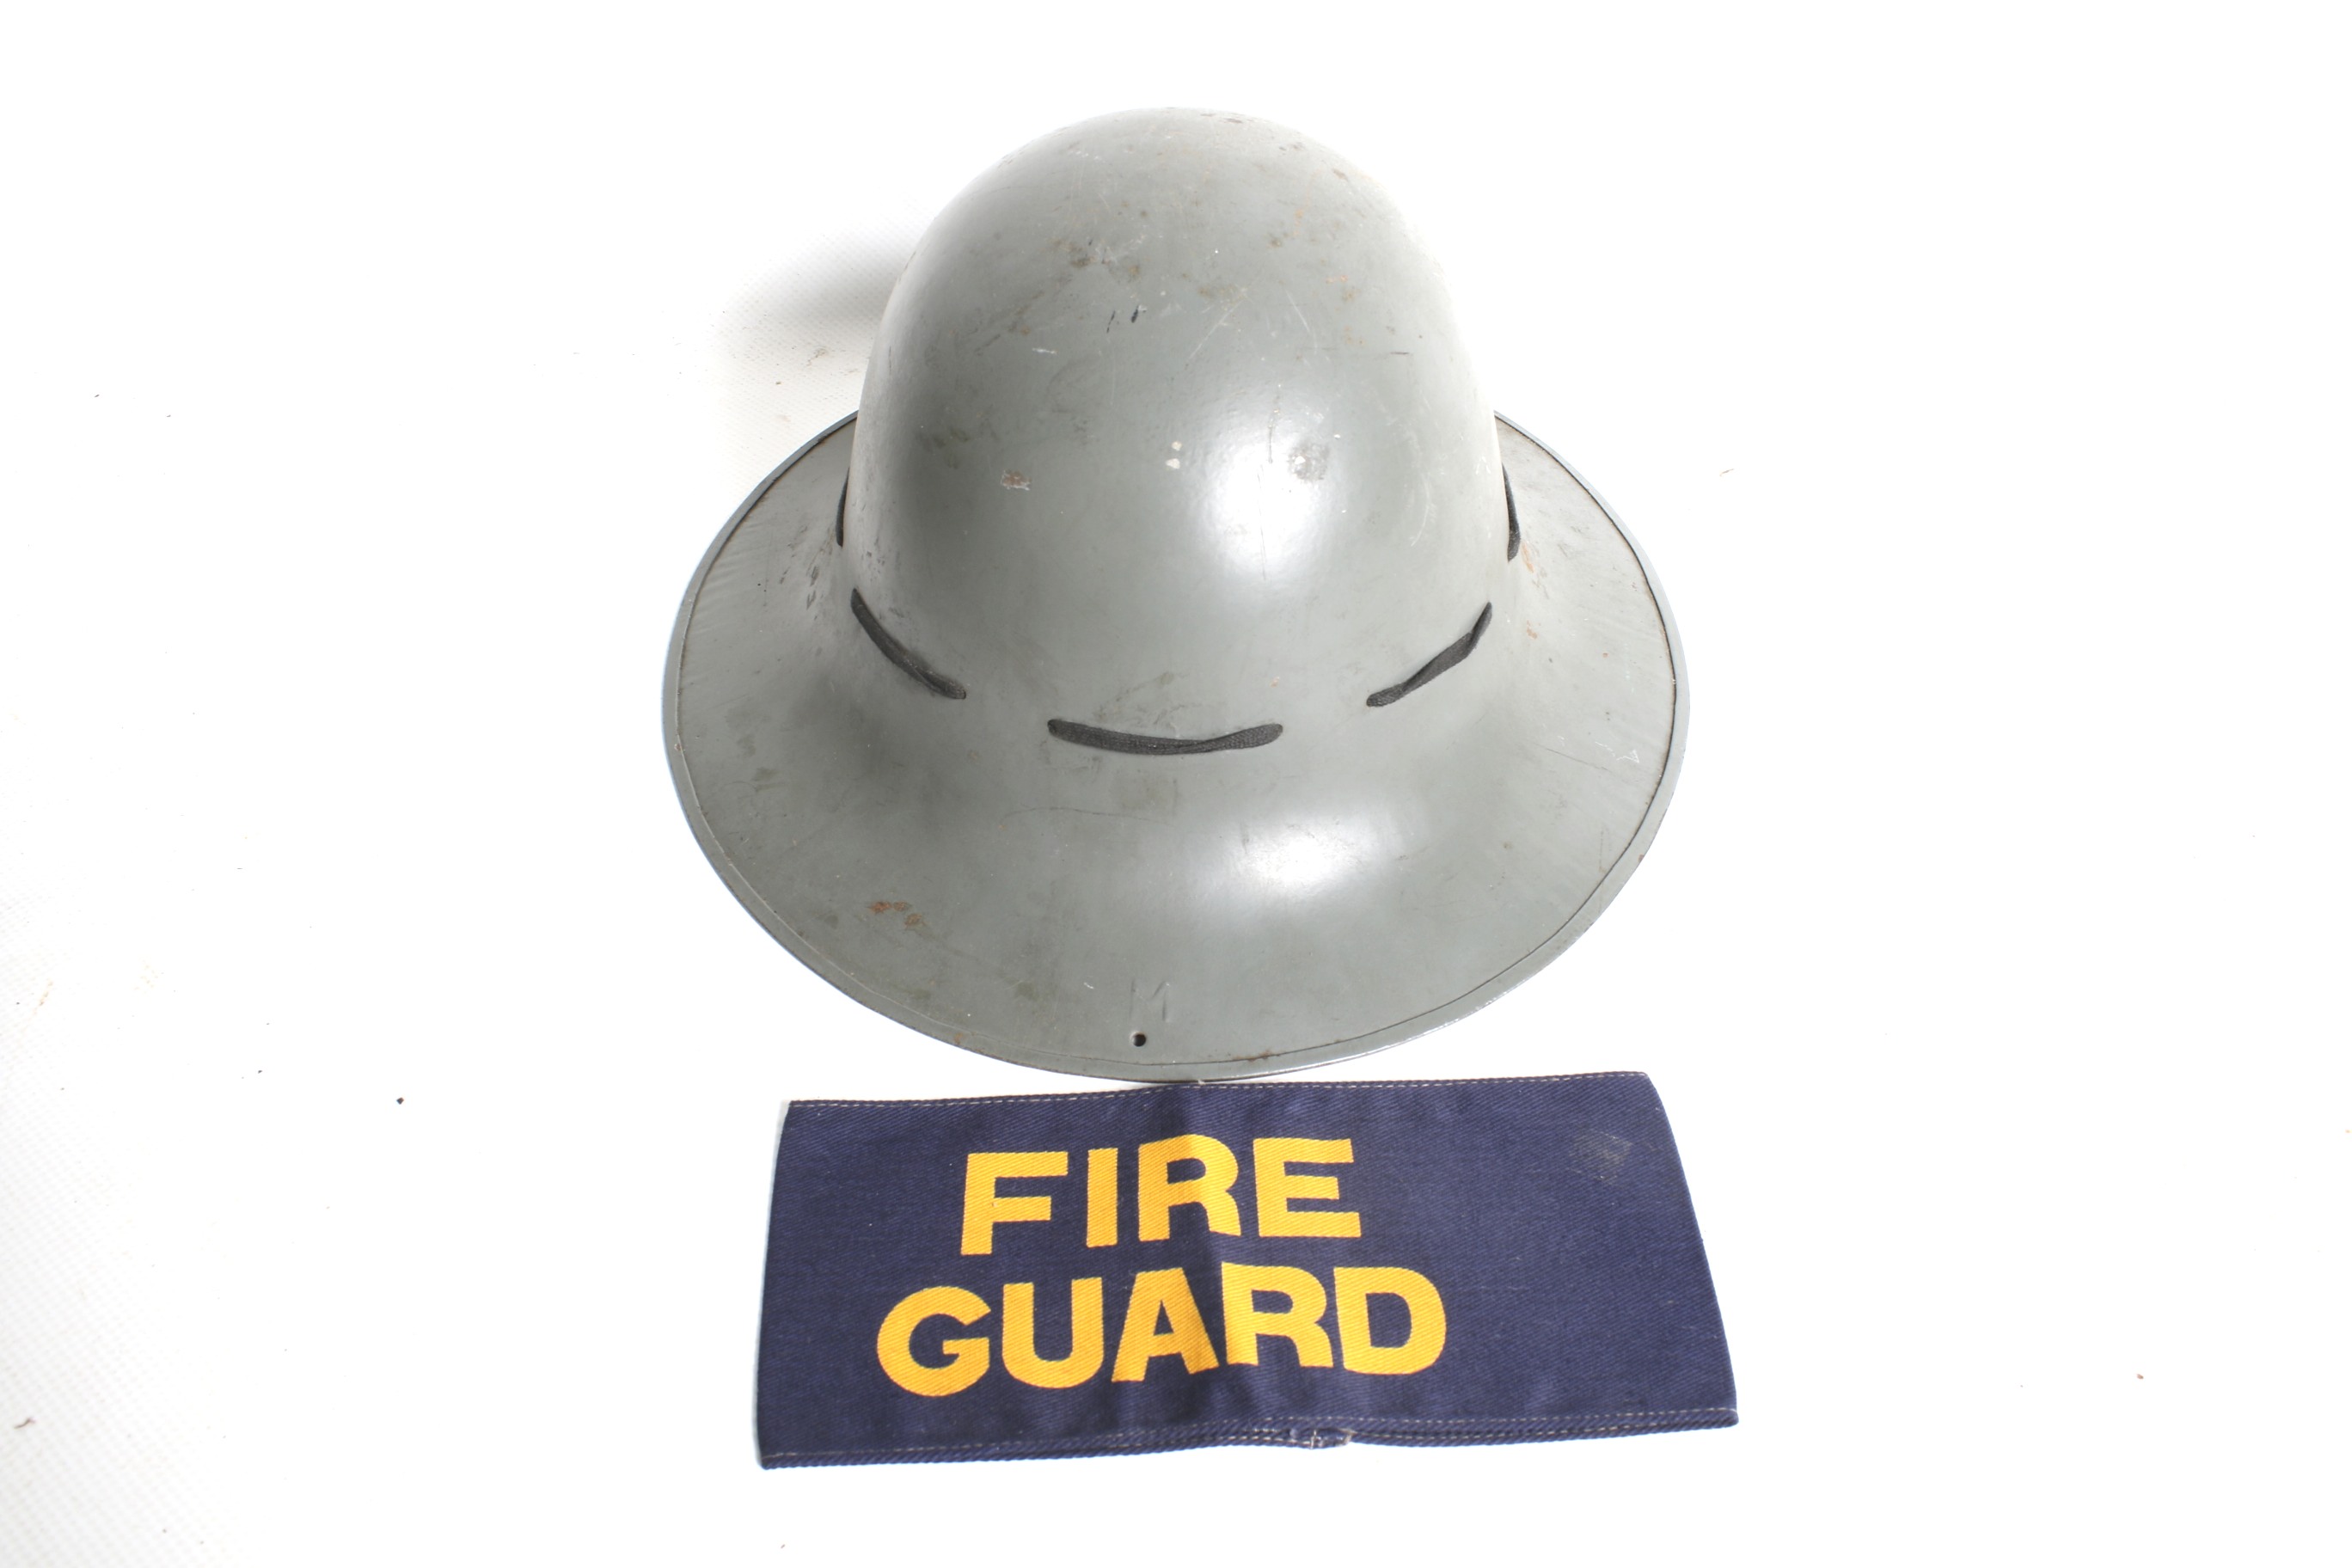 A WWII home front 'Zuckerman' helmet and a 'Fire Guard' armband.